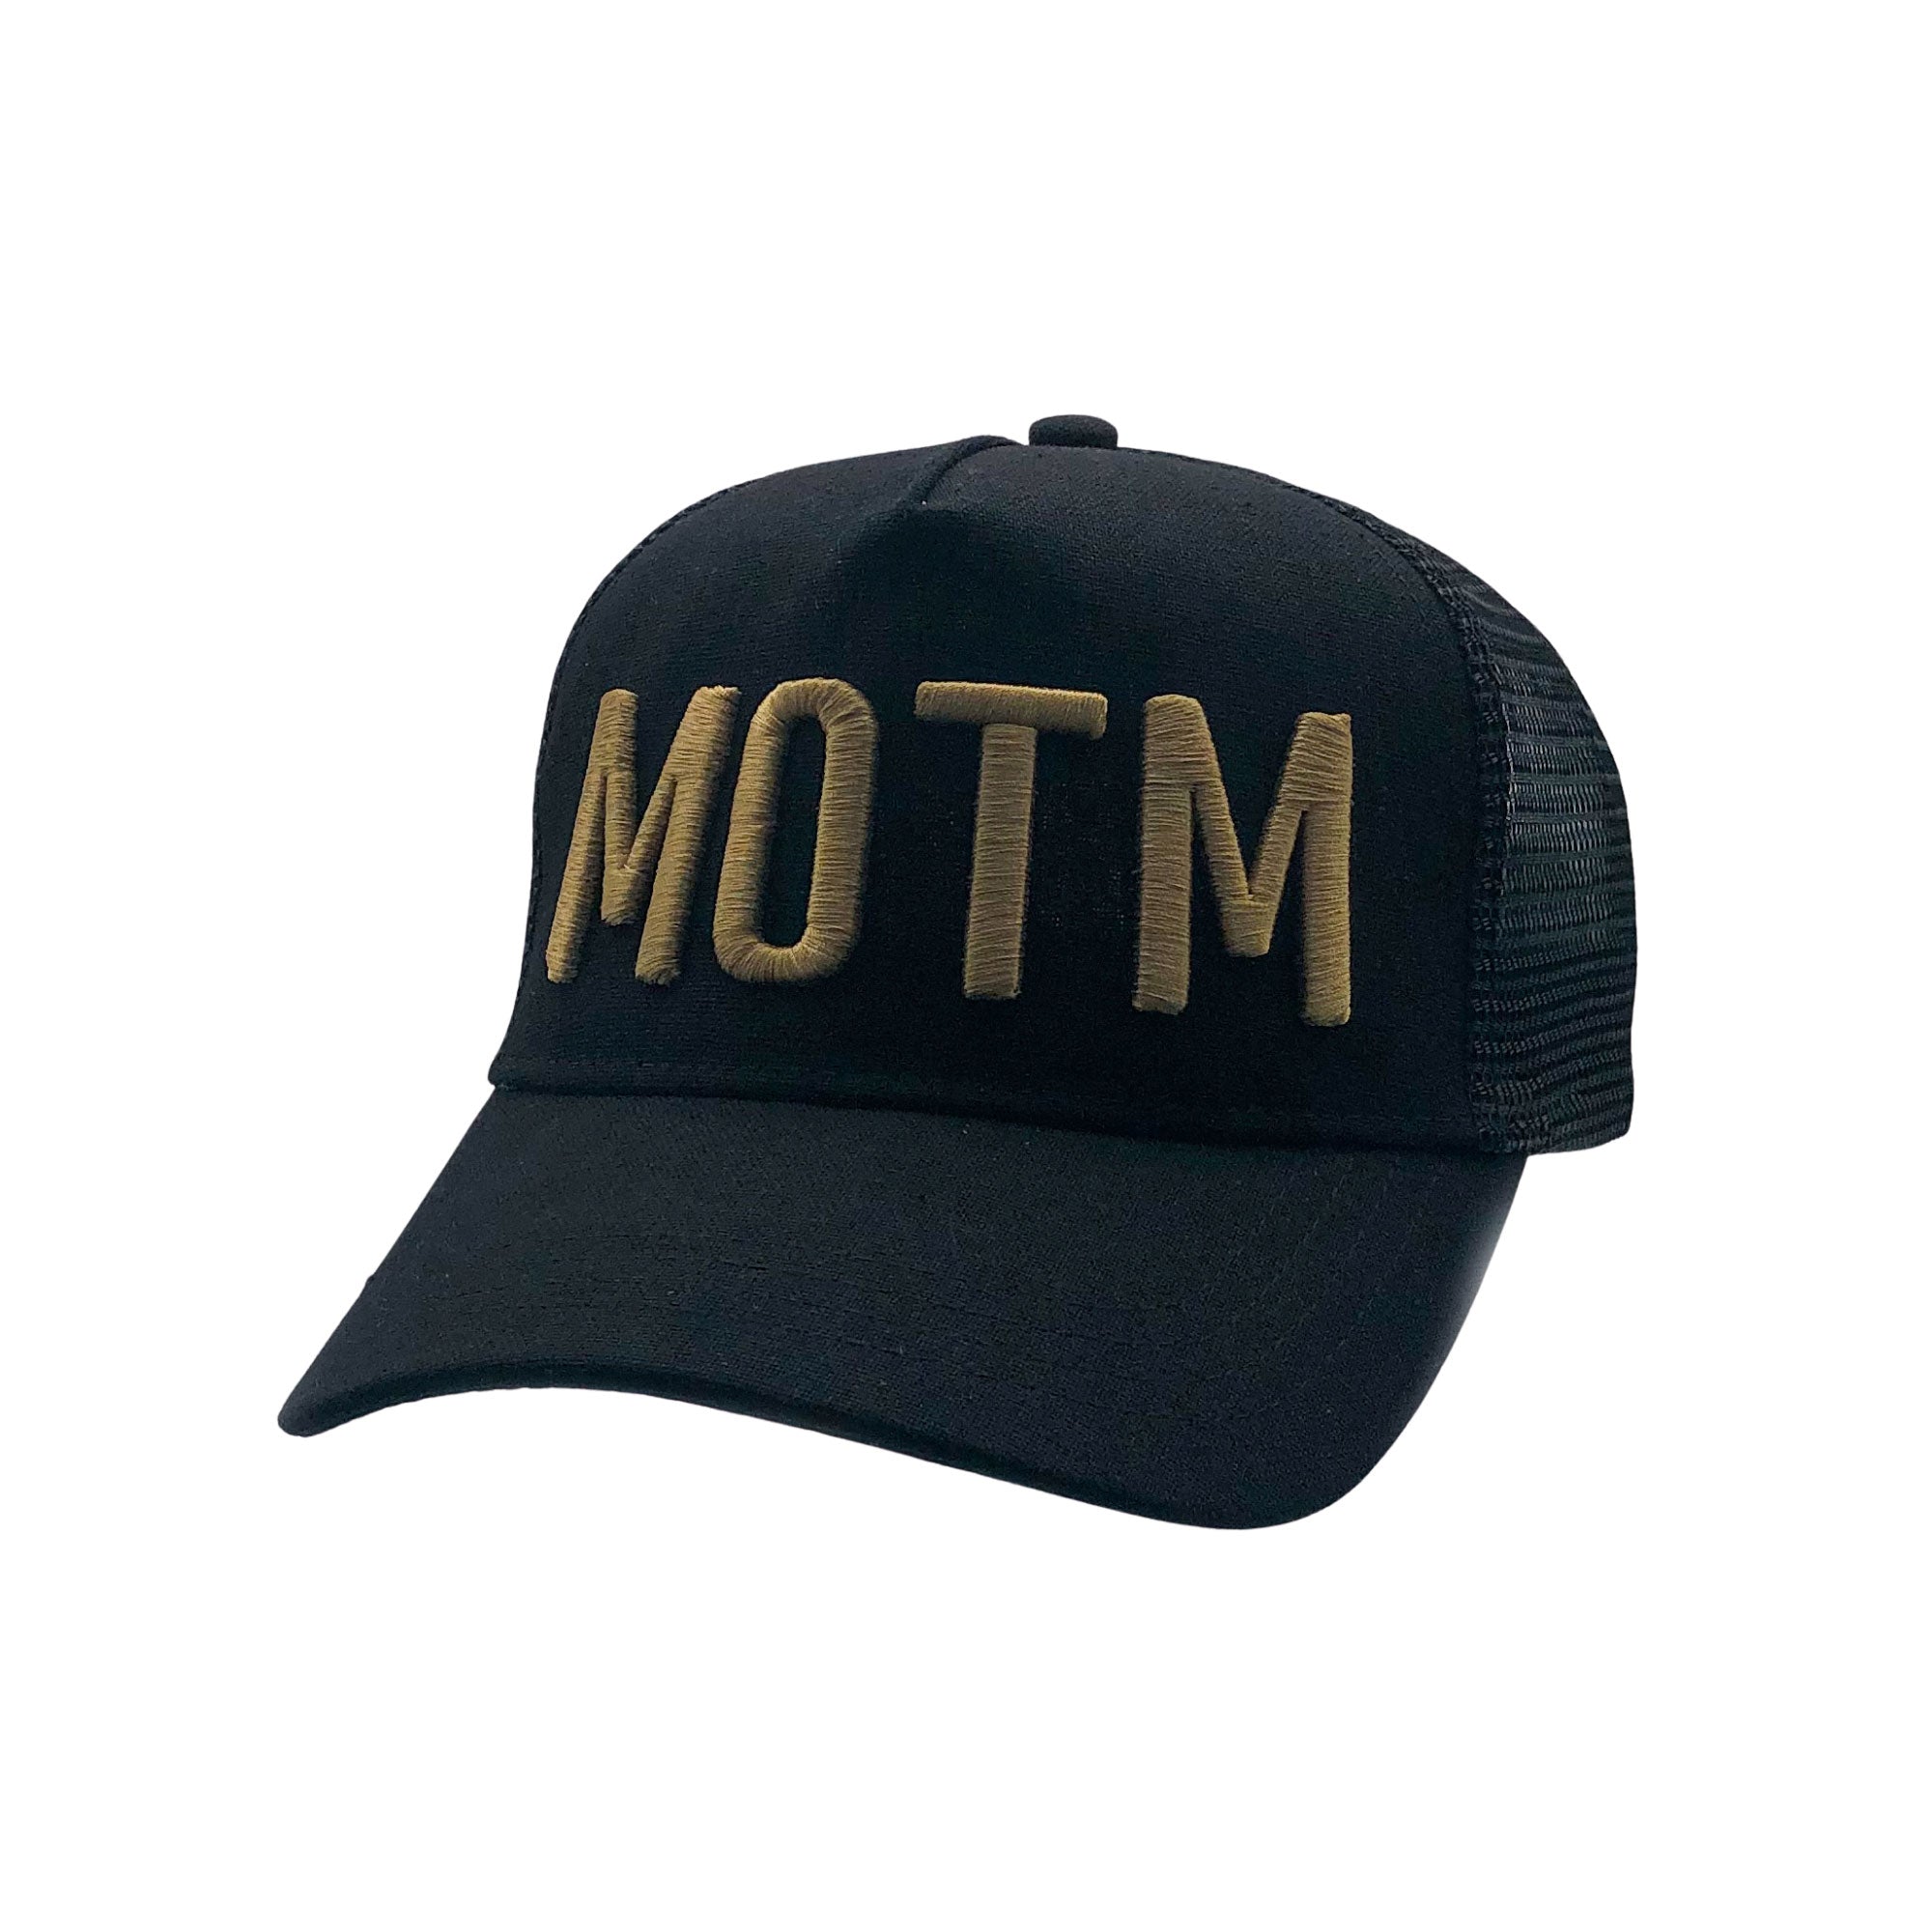 MAN OF THE MATCH® Roberto Carlos Official Cap - MOTM ICON 3D Embroidered Gold on Black - Premium Linen